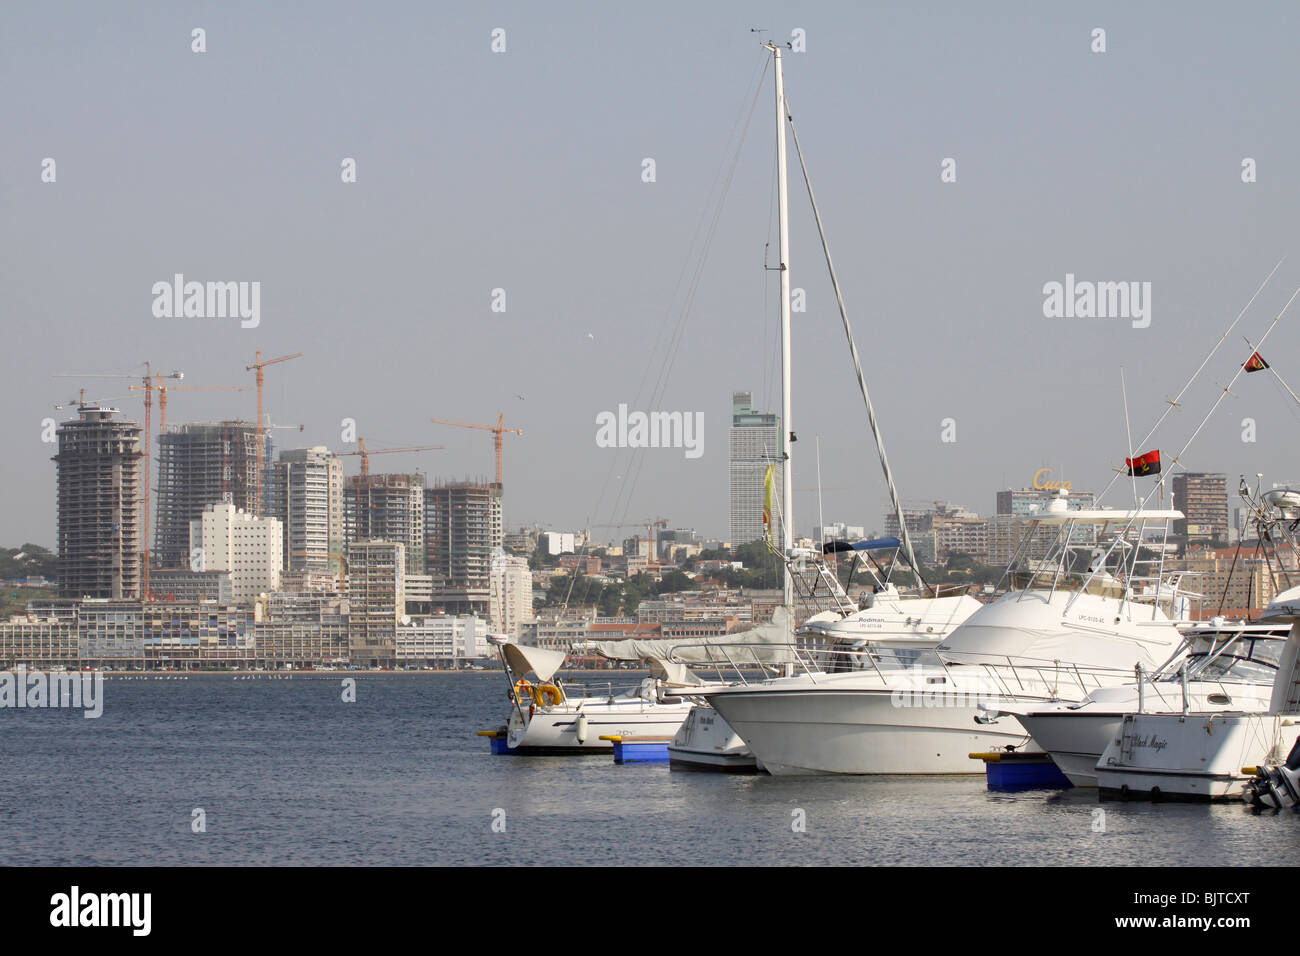 The Sonangol oil company headquarters seen from across the harbour from the Ilha. Luanda. Angola. Africa Stock Photo